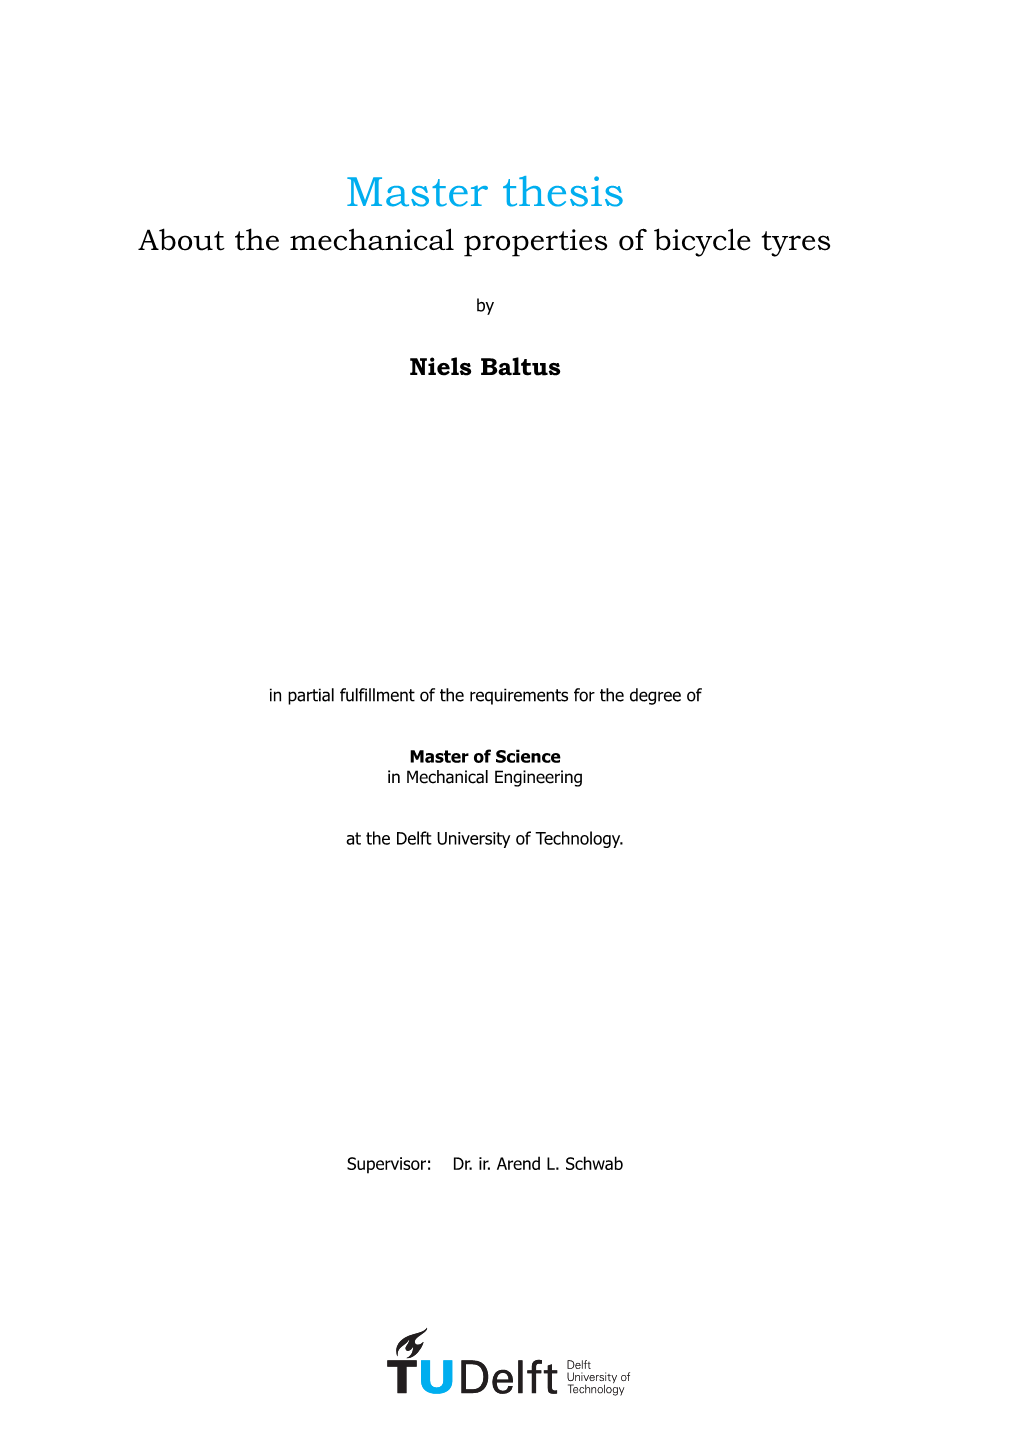 Master Thesis About the Mechanical Properties of Bicycle Tyres